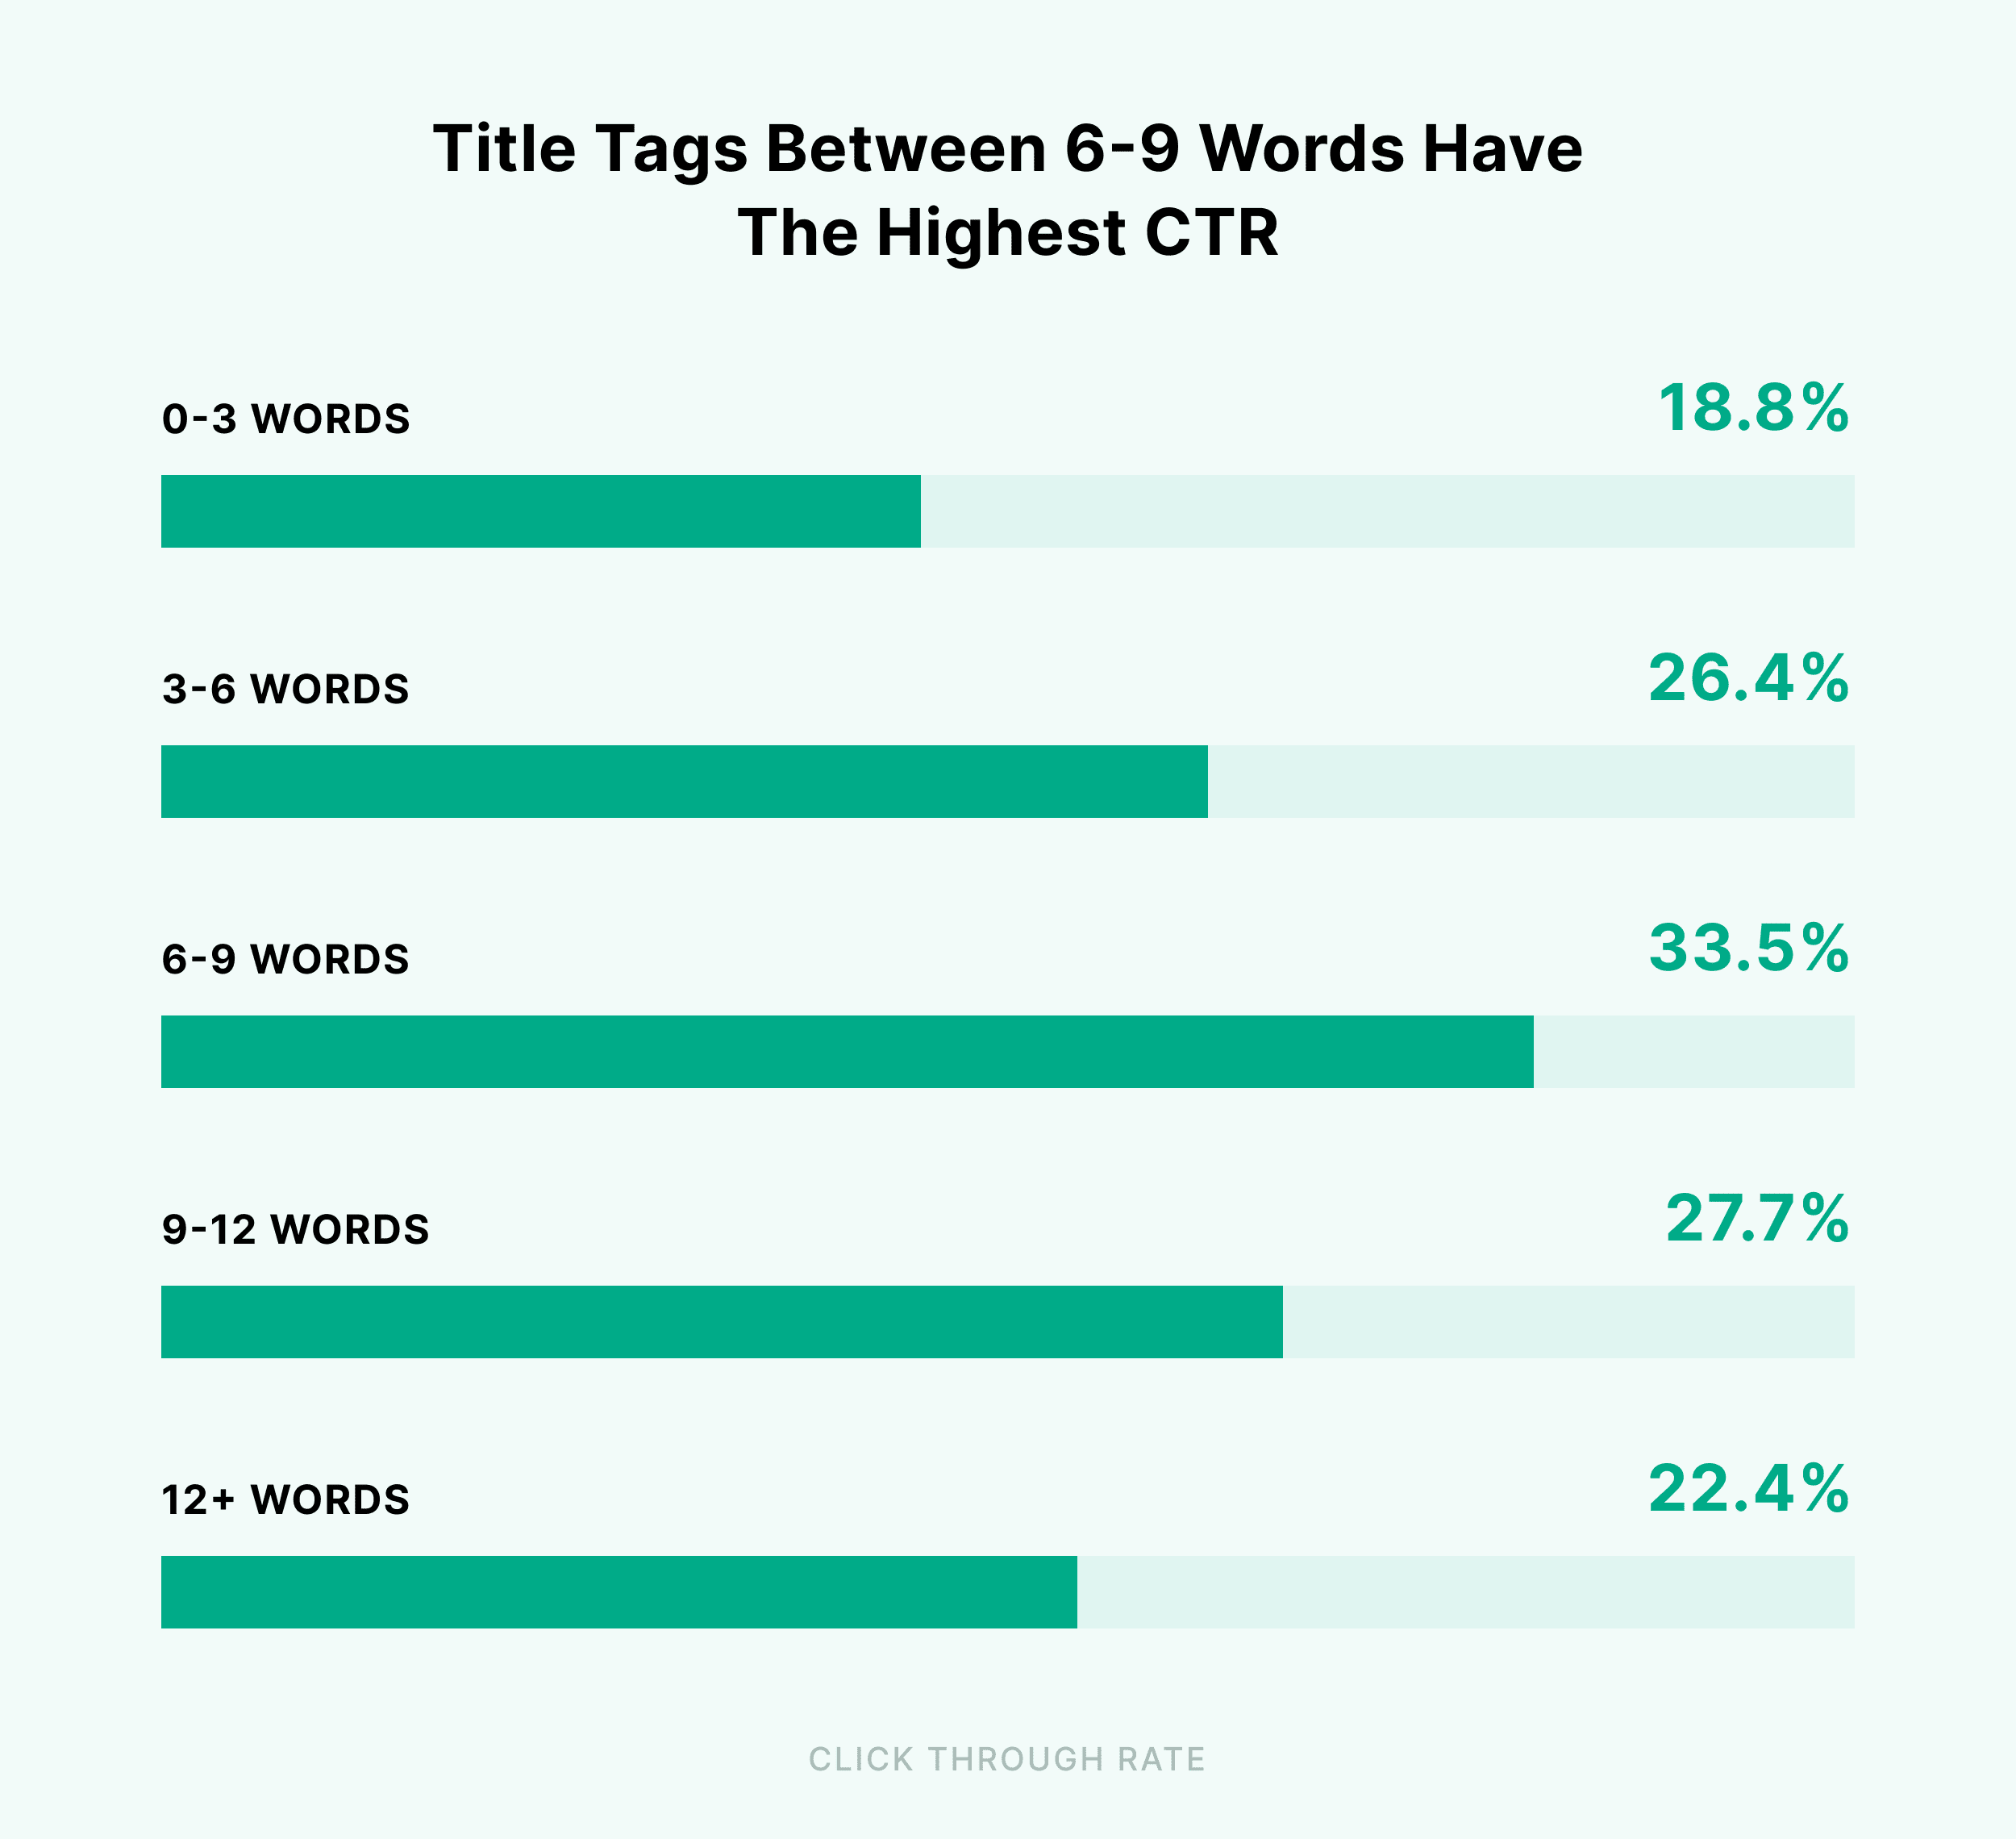 Title tags between 6 to 9 words have the highest CTR